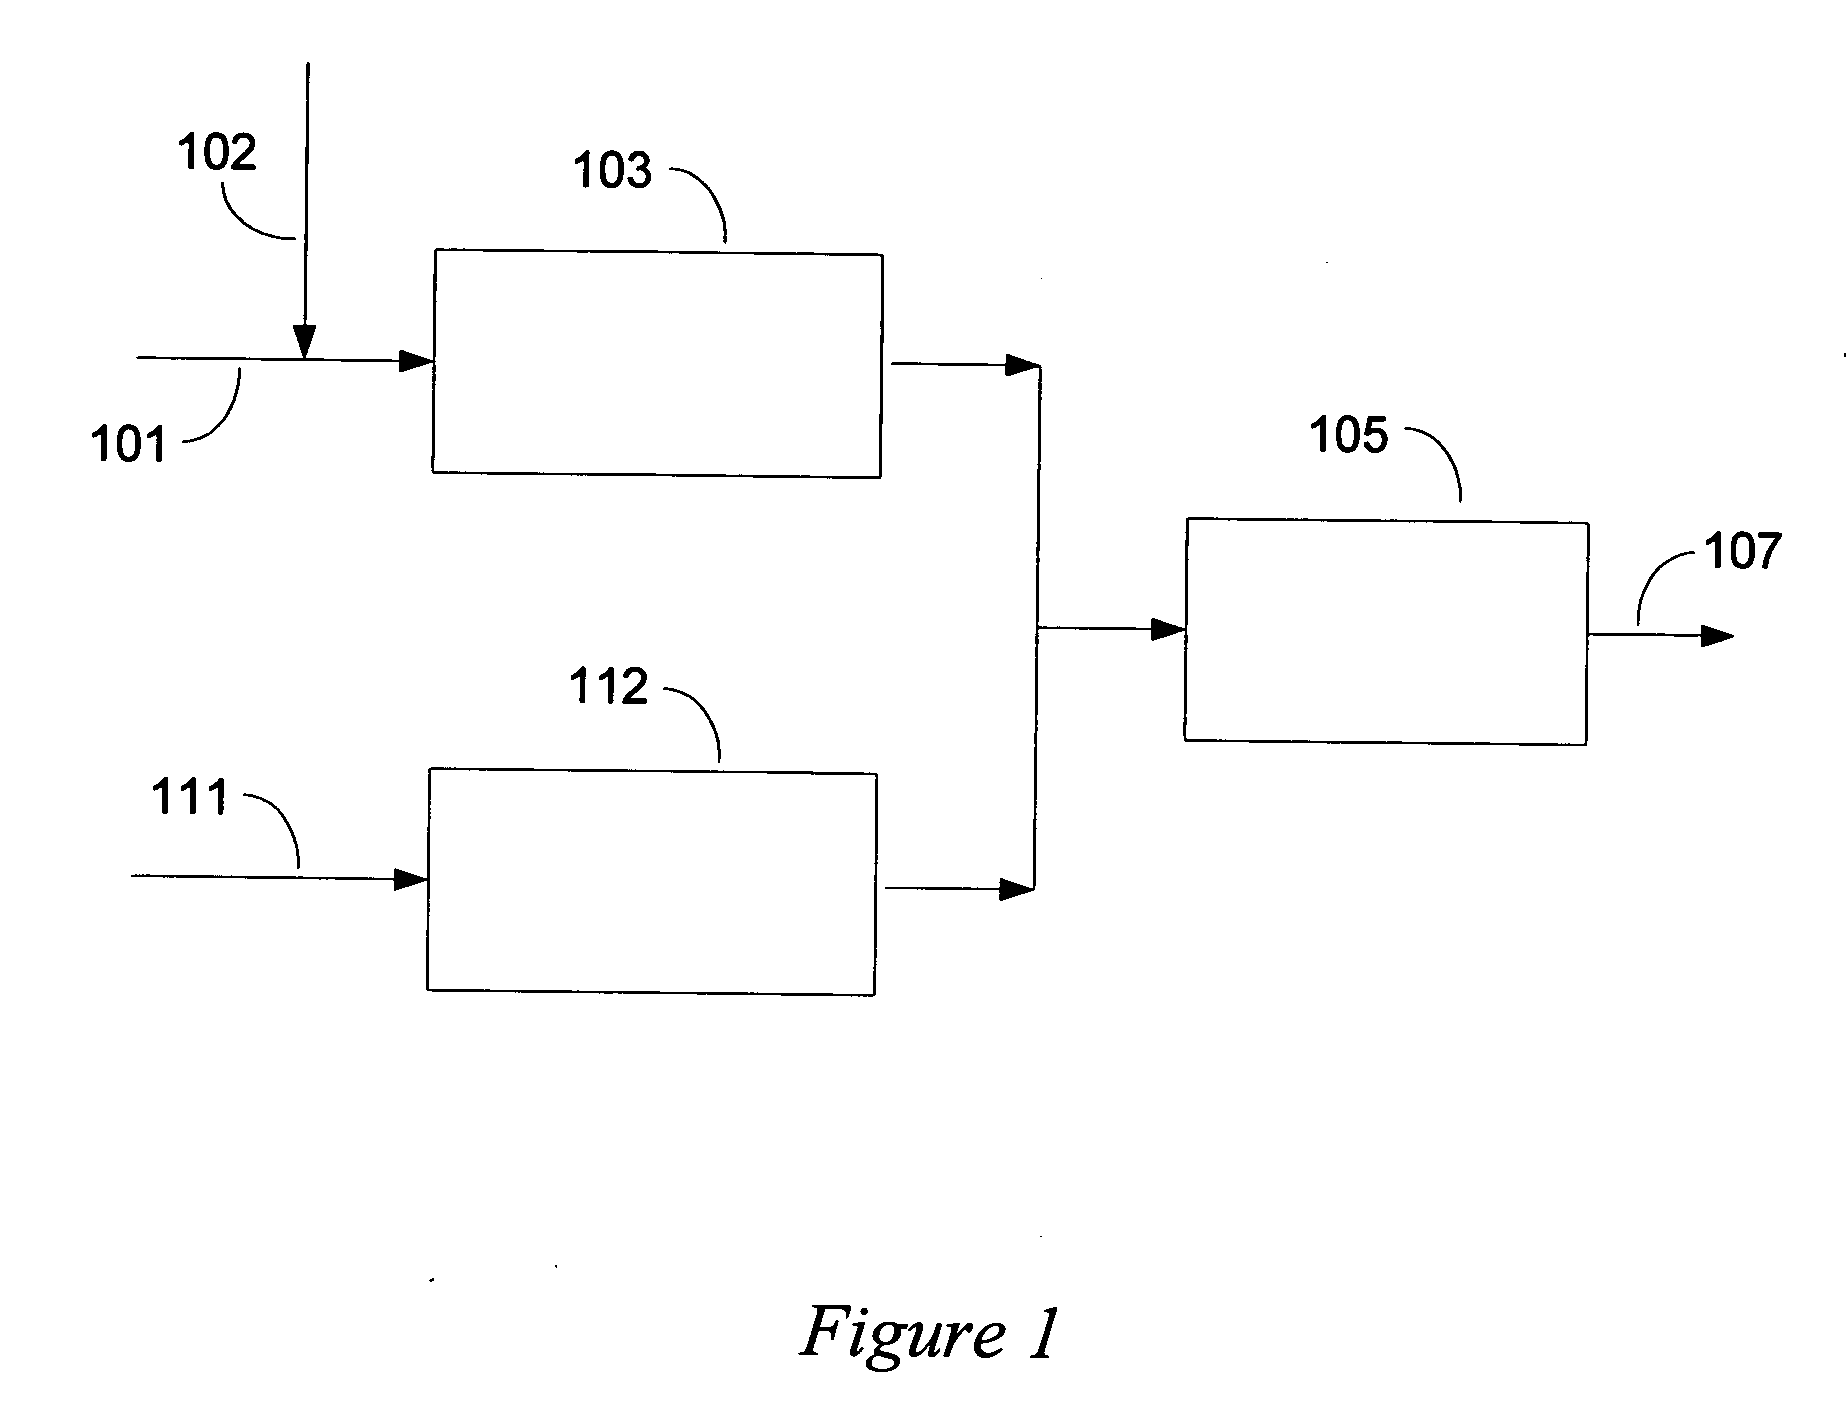 Method for making single-wall carbon nanotubes using supported catalysts